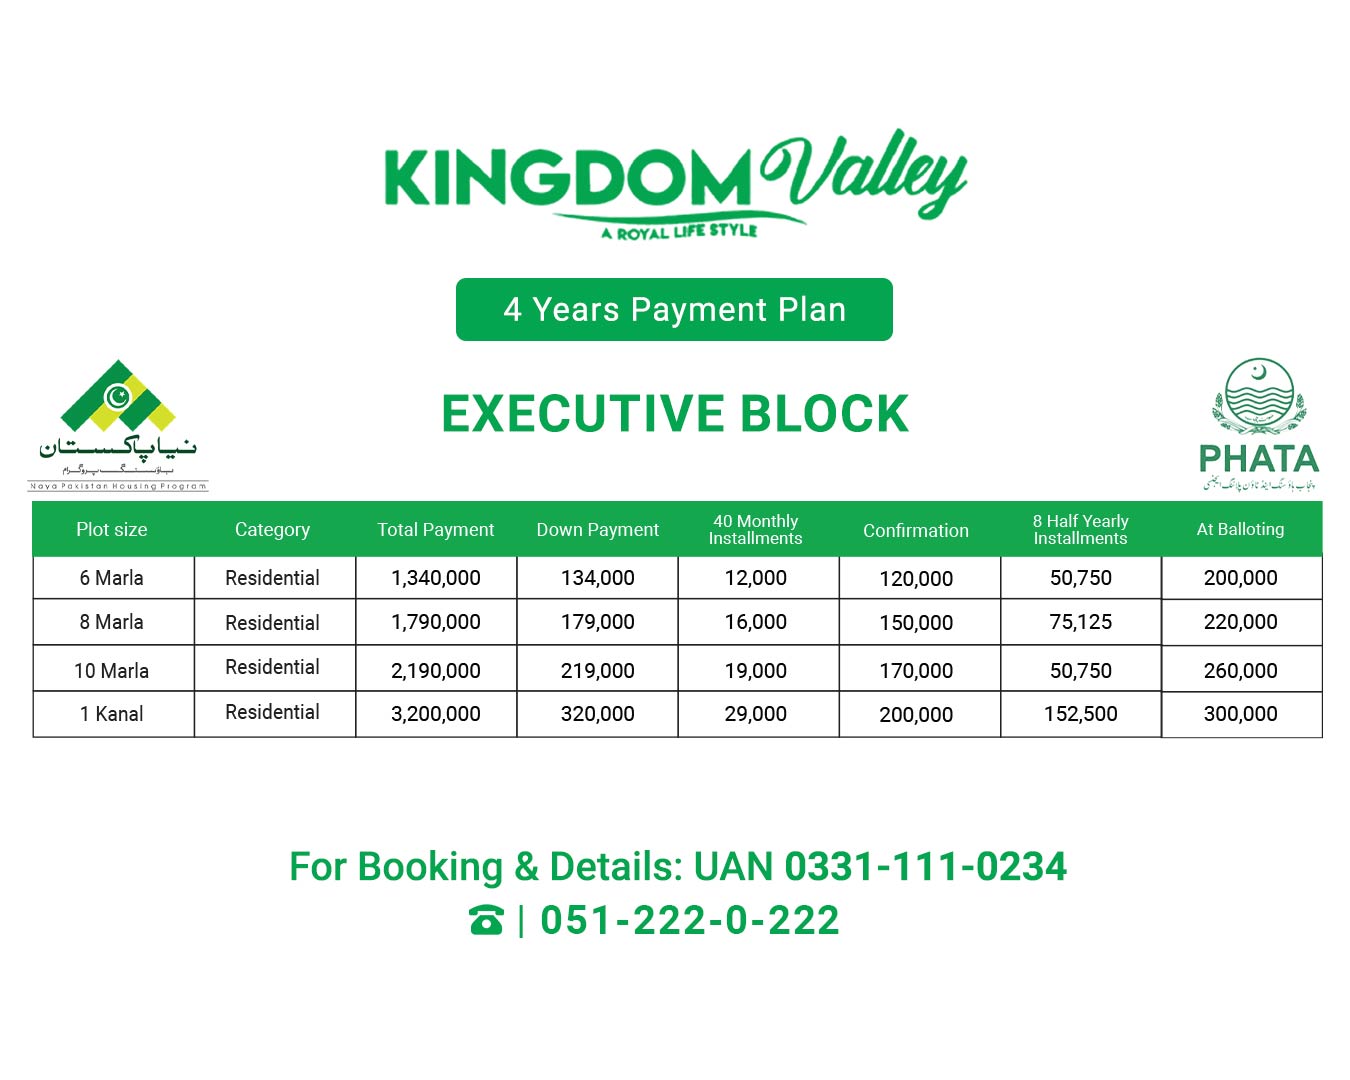 kingdom valley executive block New payment plan